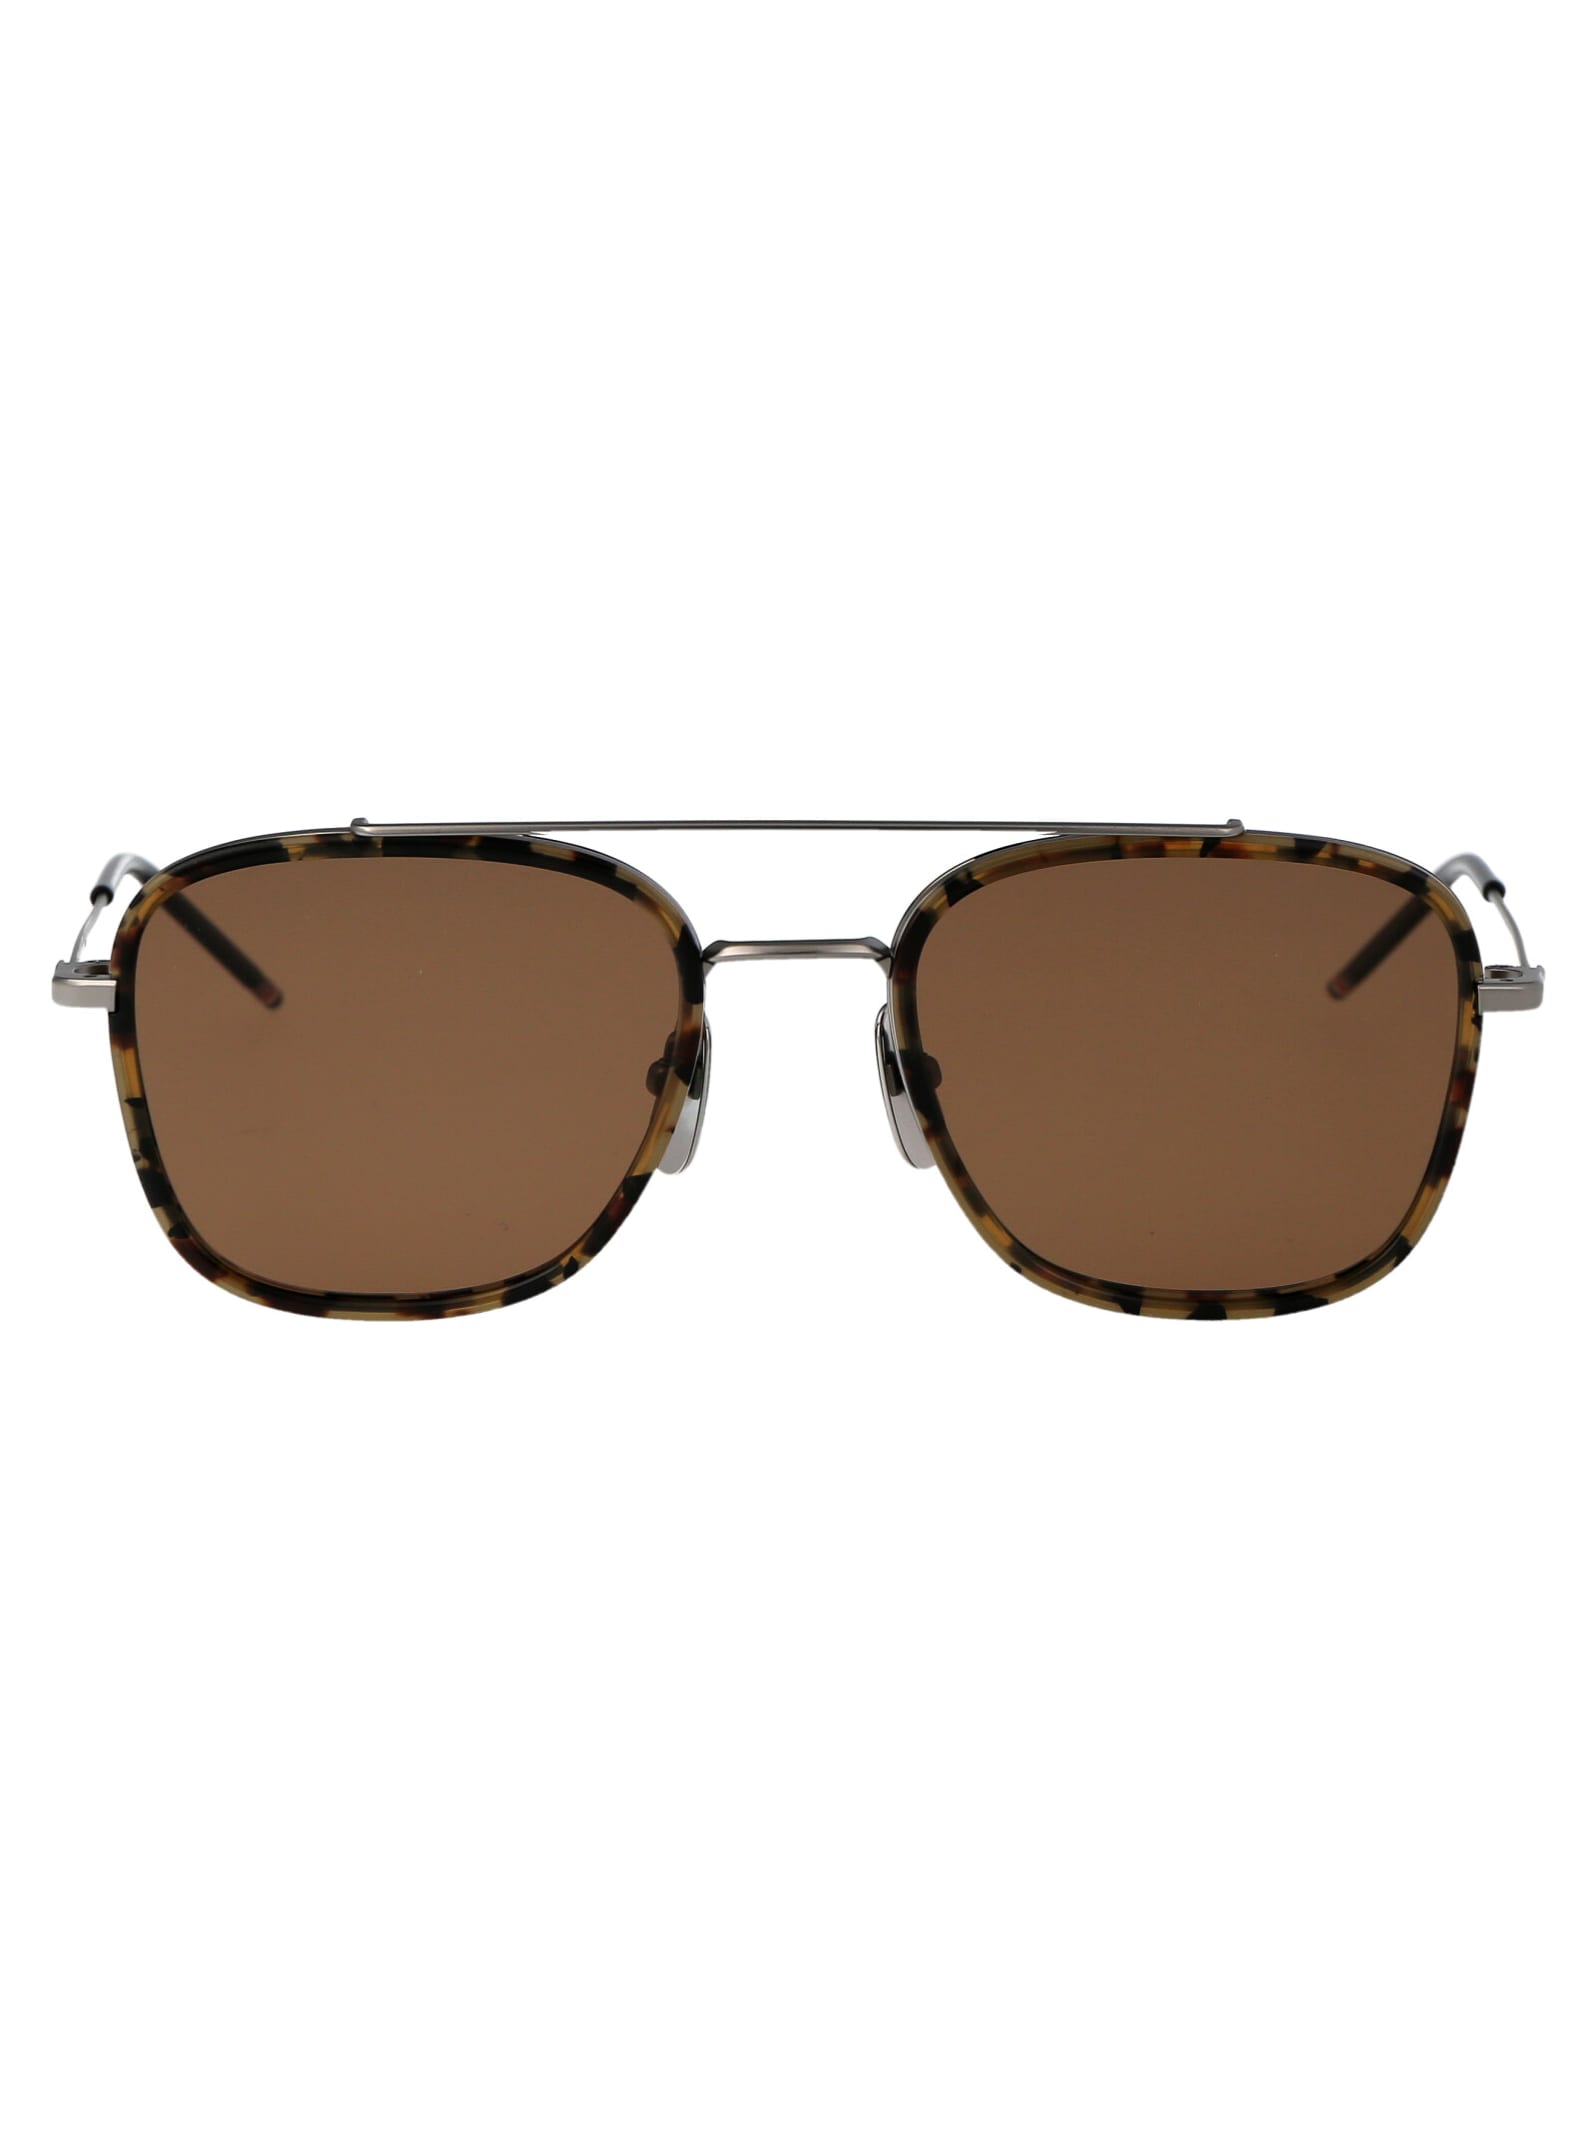 Thom Browne Ues800a-g0003-205-51 Sunglasses In 205 Light Silver